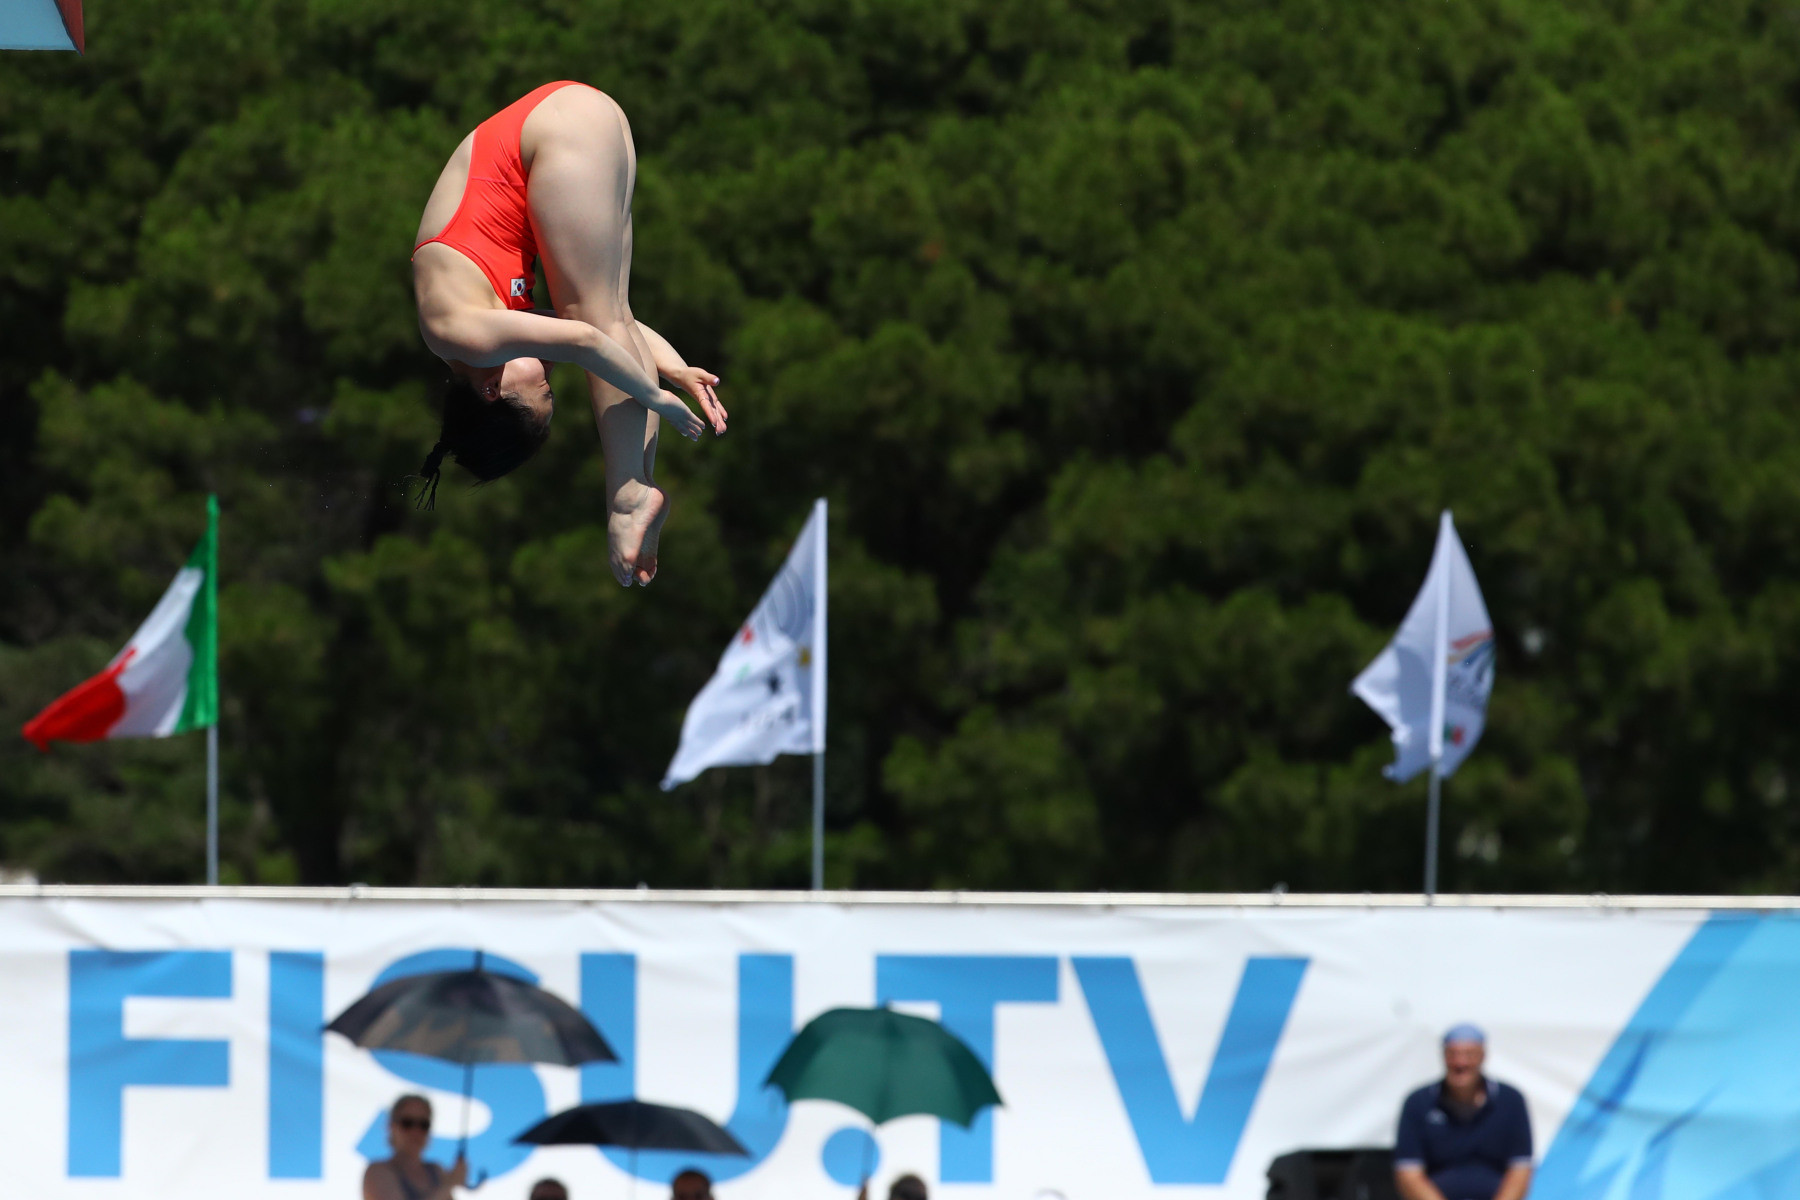 Competition took place at the pool at Mostra d'Oltremare, in the shadow of San Paolo Stadium ©Naples 2019